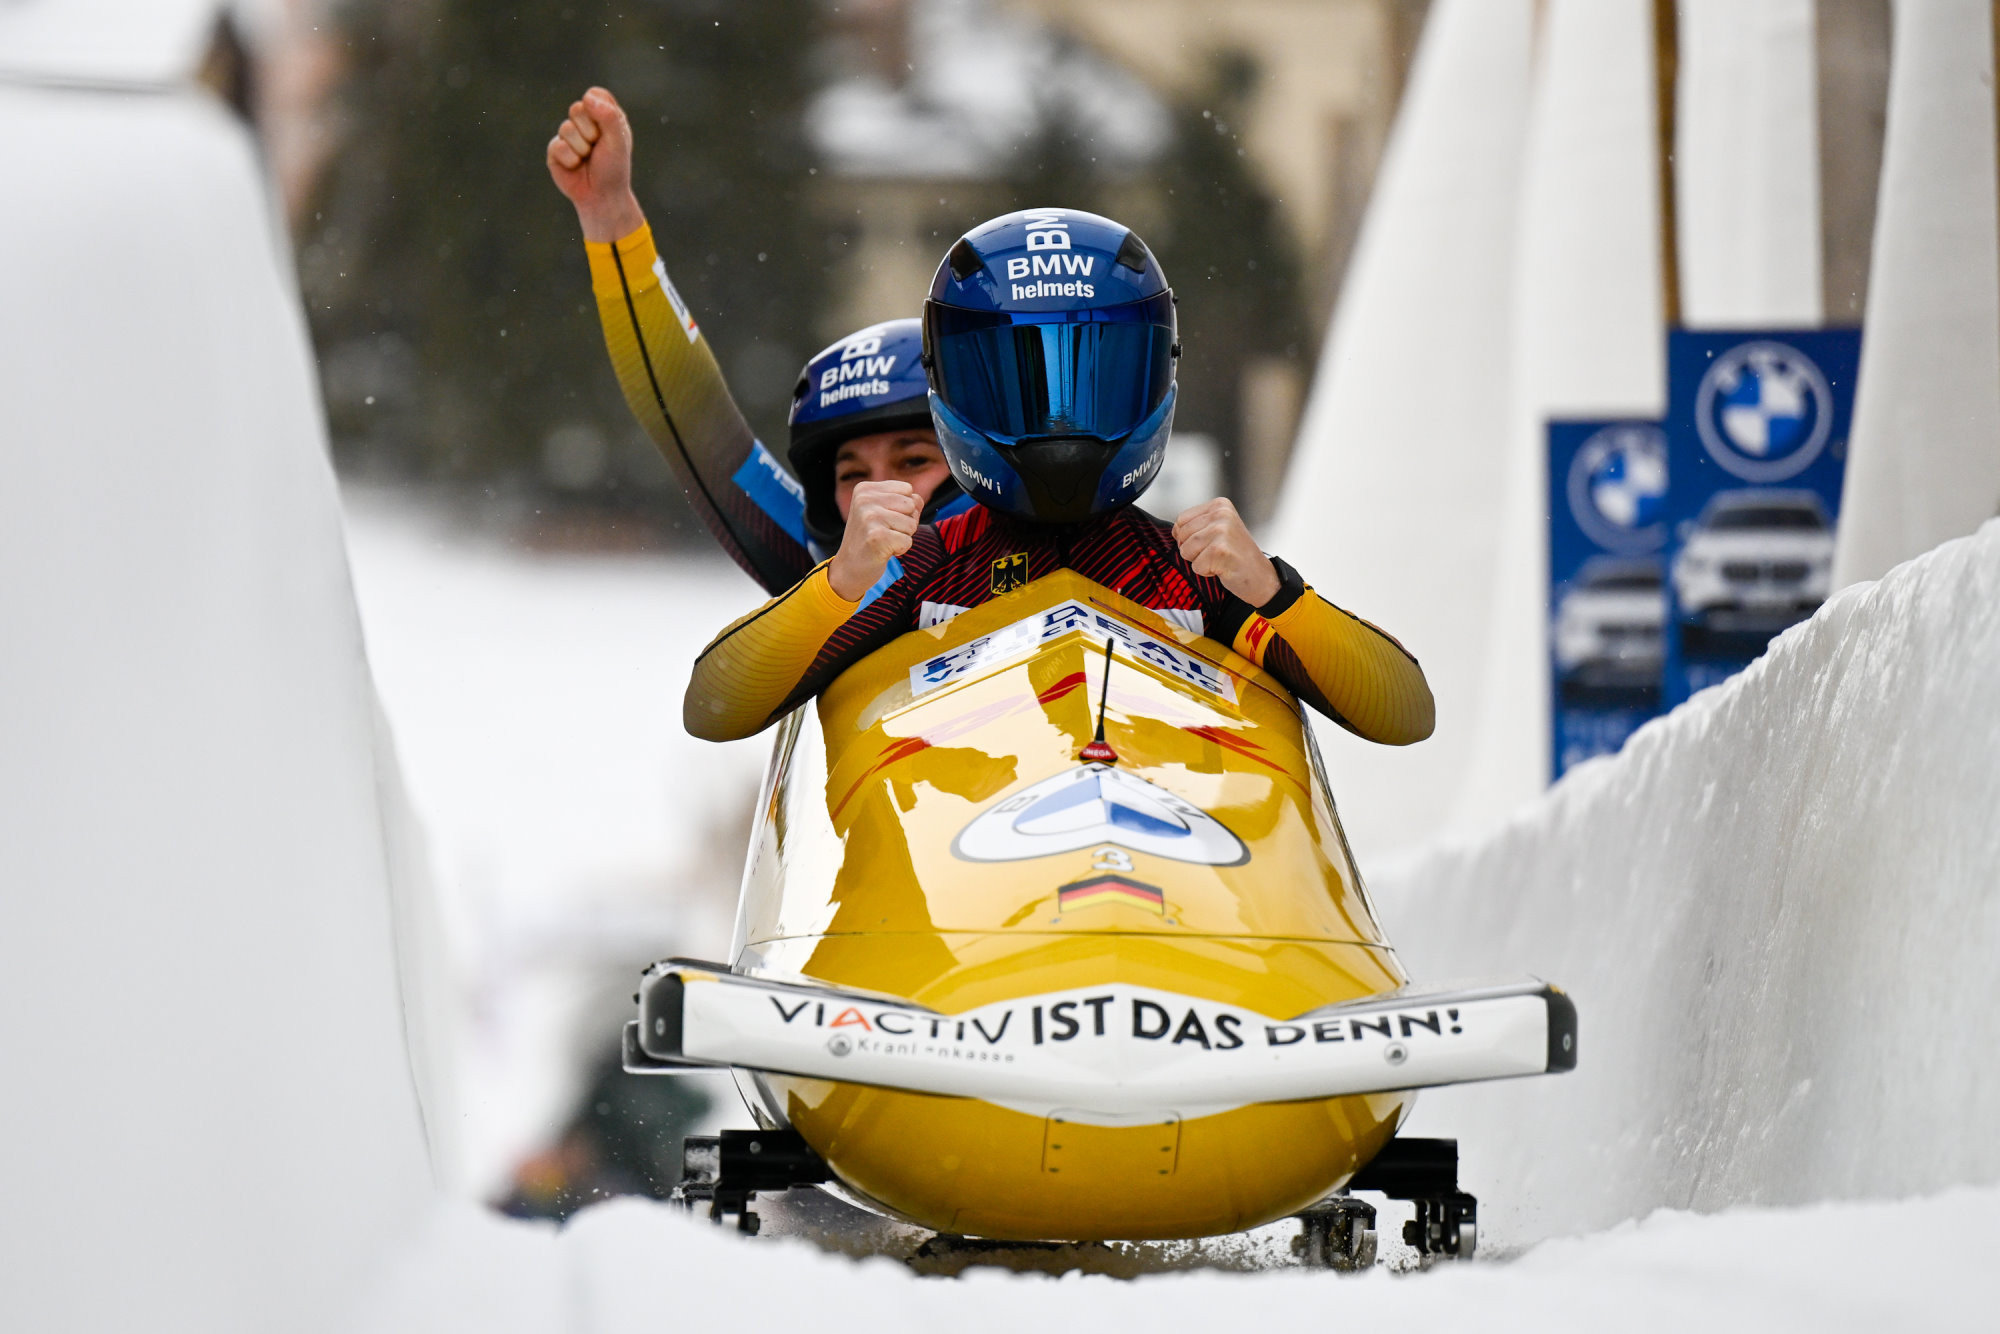 Germany's Kim Kalicki won the gold medal in the two-woman bobsleigh at the IBSF World Championships in St Moritz having finished second in the previous two editions ©IBSF 